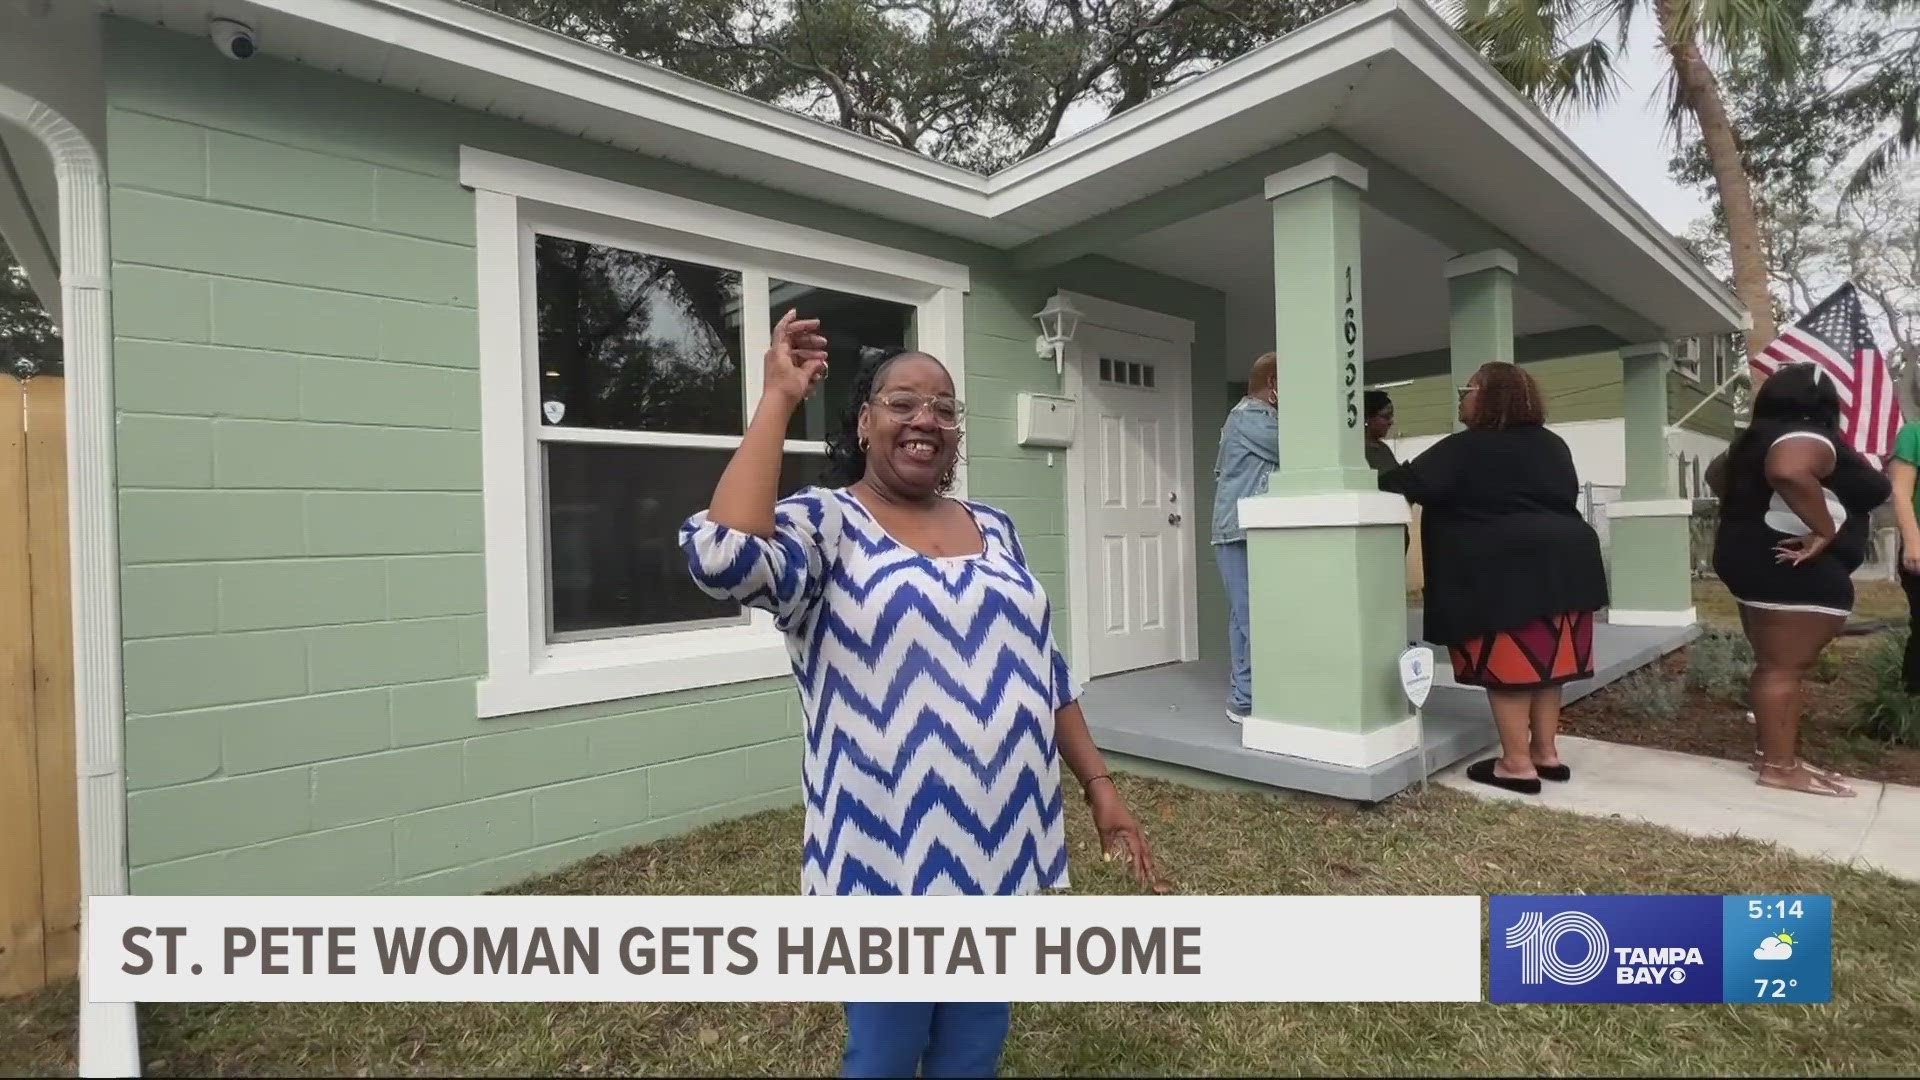 Katasha Bryant has waited over a year to move into her new home. Thanks to Habitat for Humanity, she will have an interest-free mortgage.